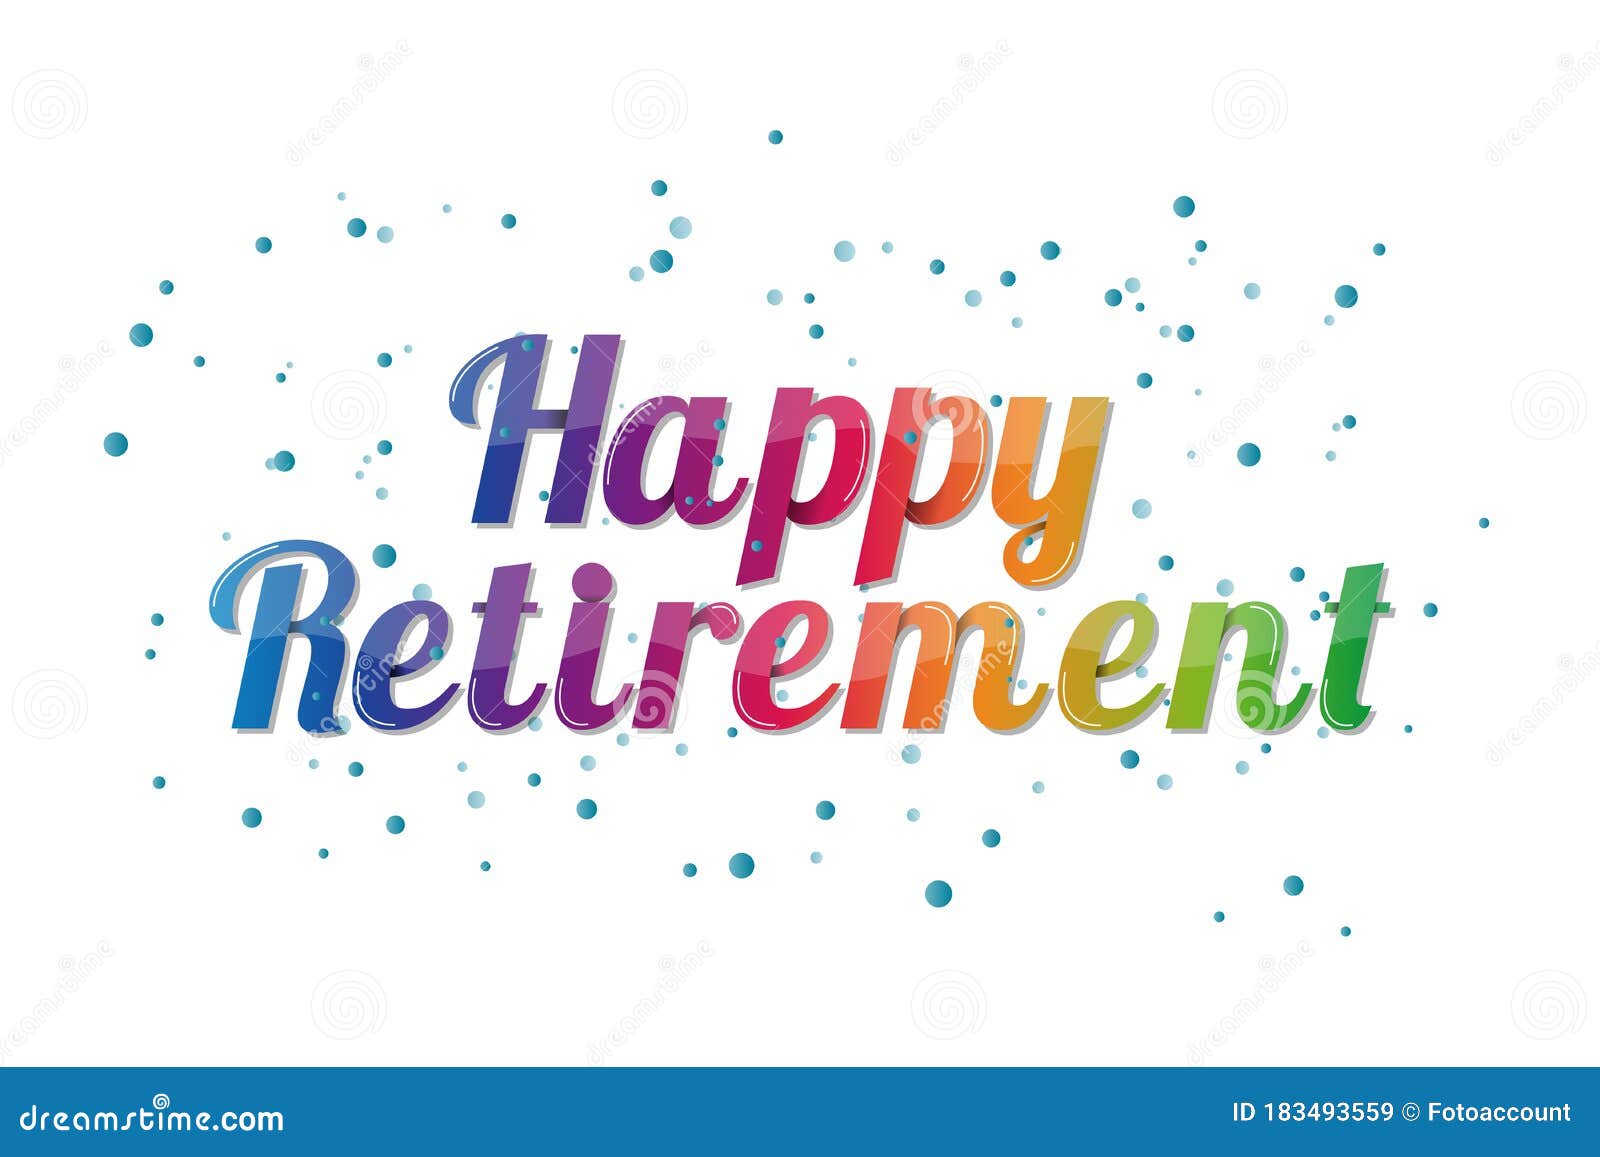 Happy Retirement Banner - Colorful Vector Illustration - Isolate ...